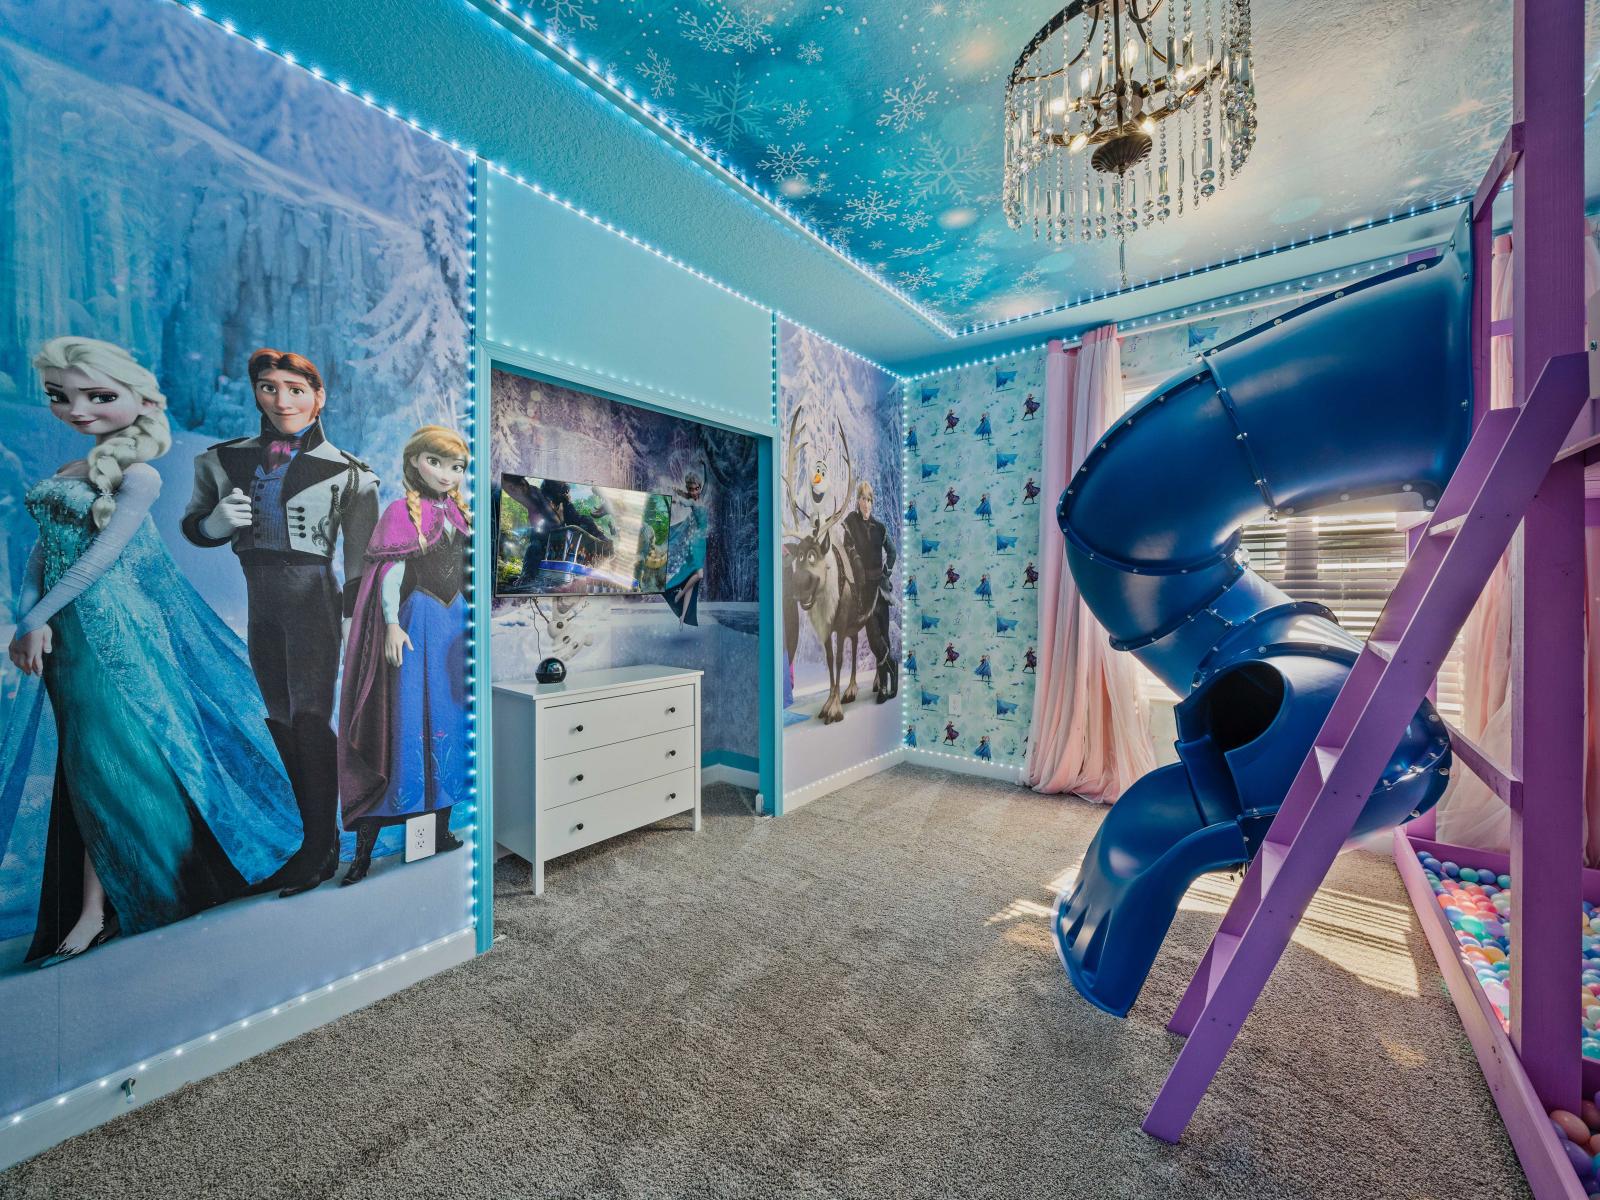 Frozen Themed Bedroom of the Home in Davenport Florida - Comfy bunker bed - Play Area and slides for endless fun - Smart TV and Netflix